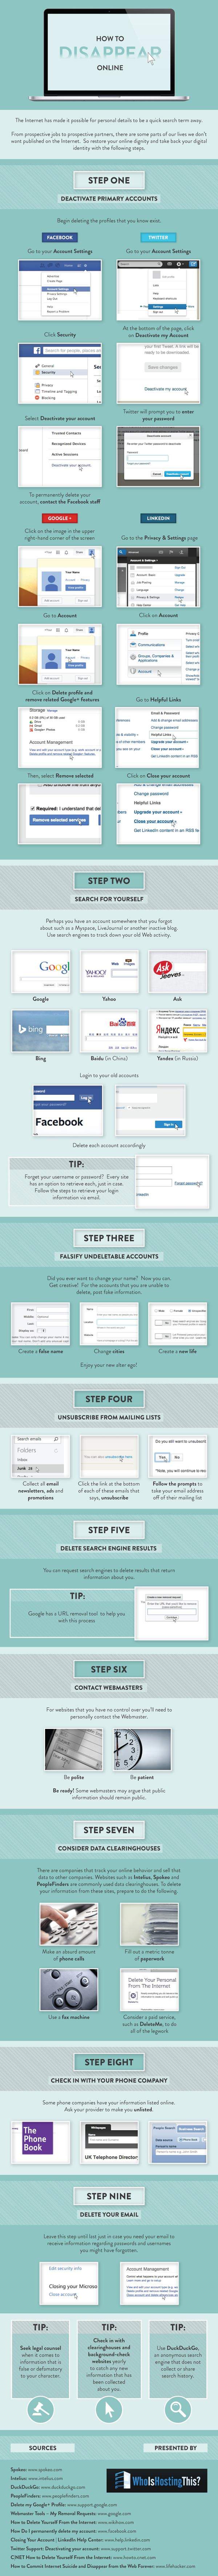 How to Disappear Online (infographic)